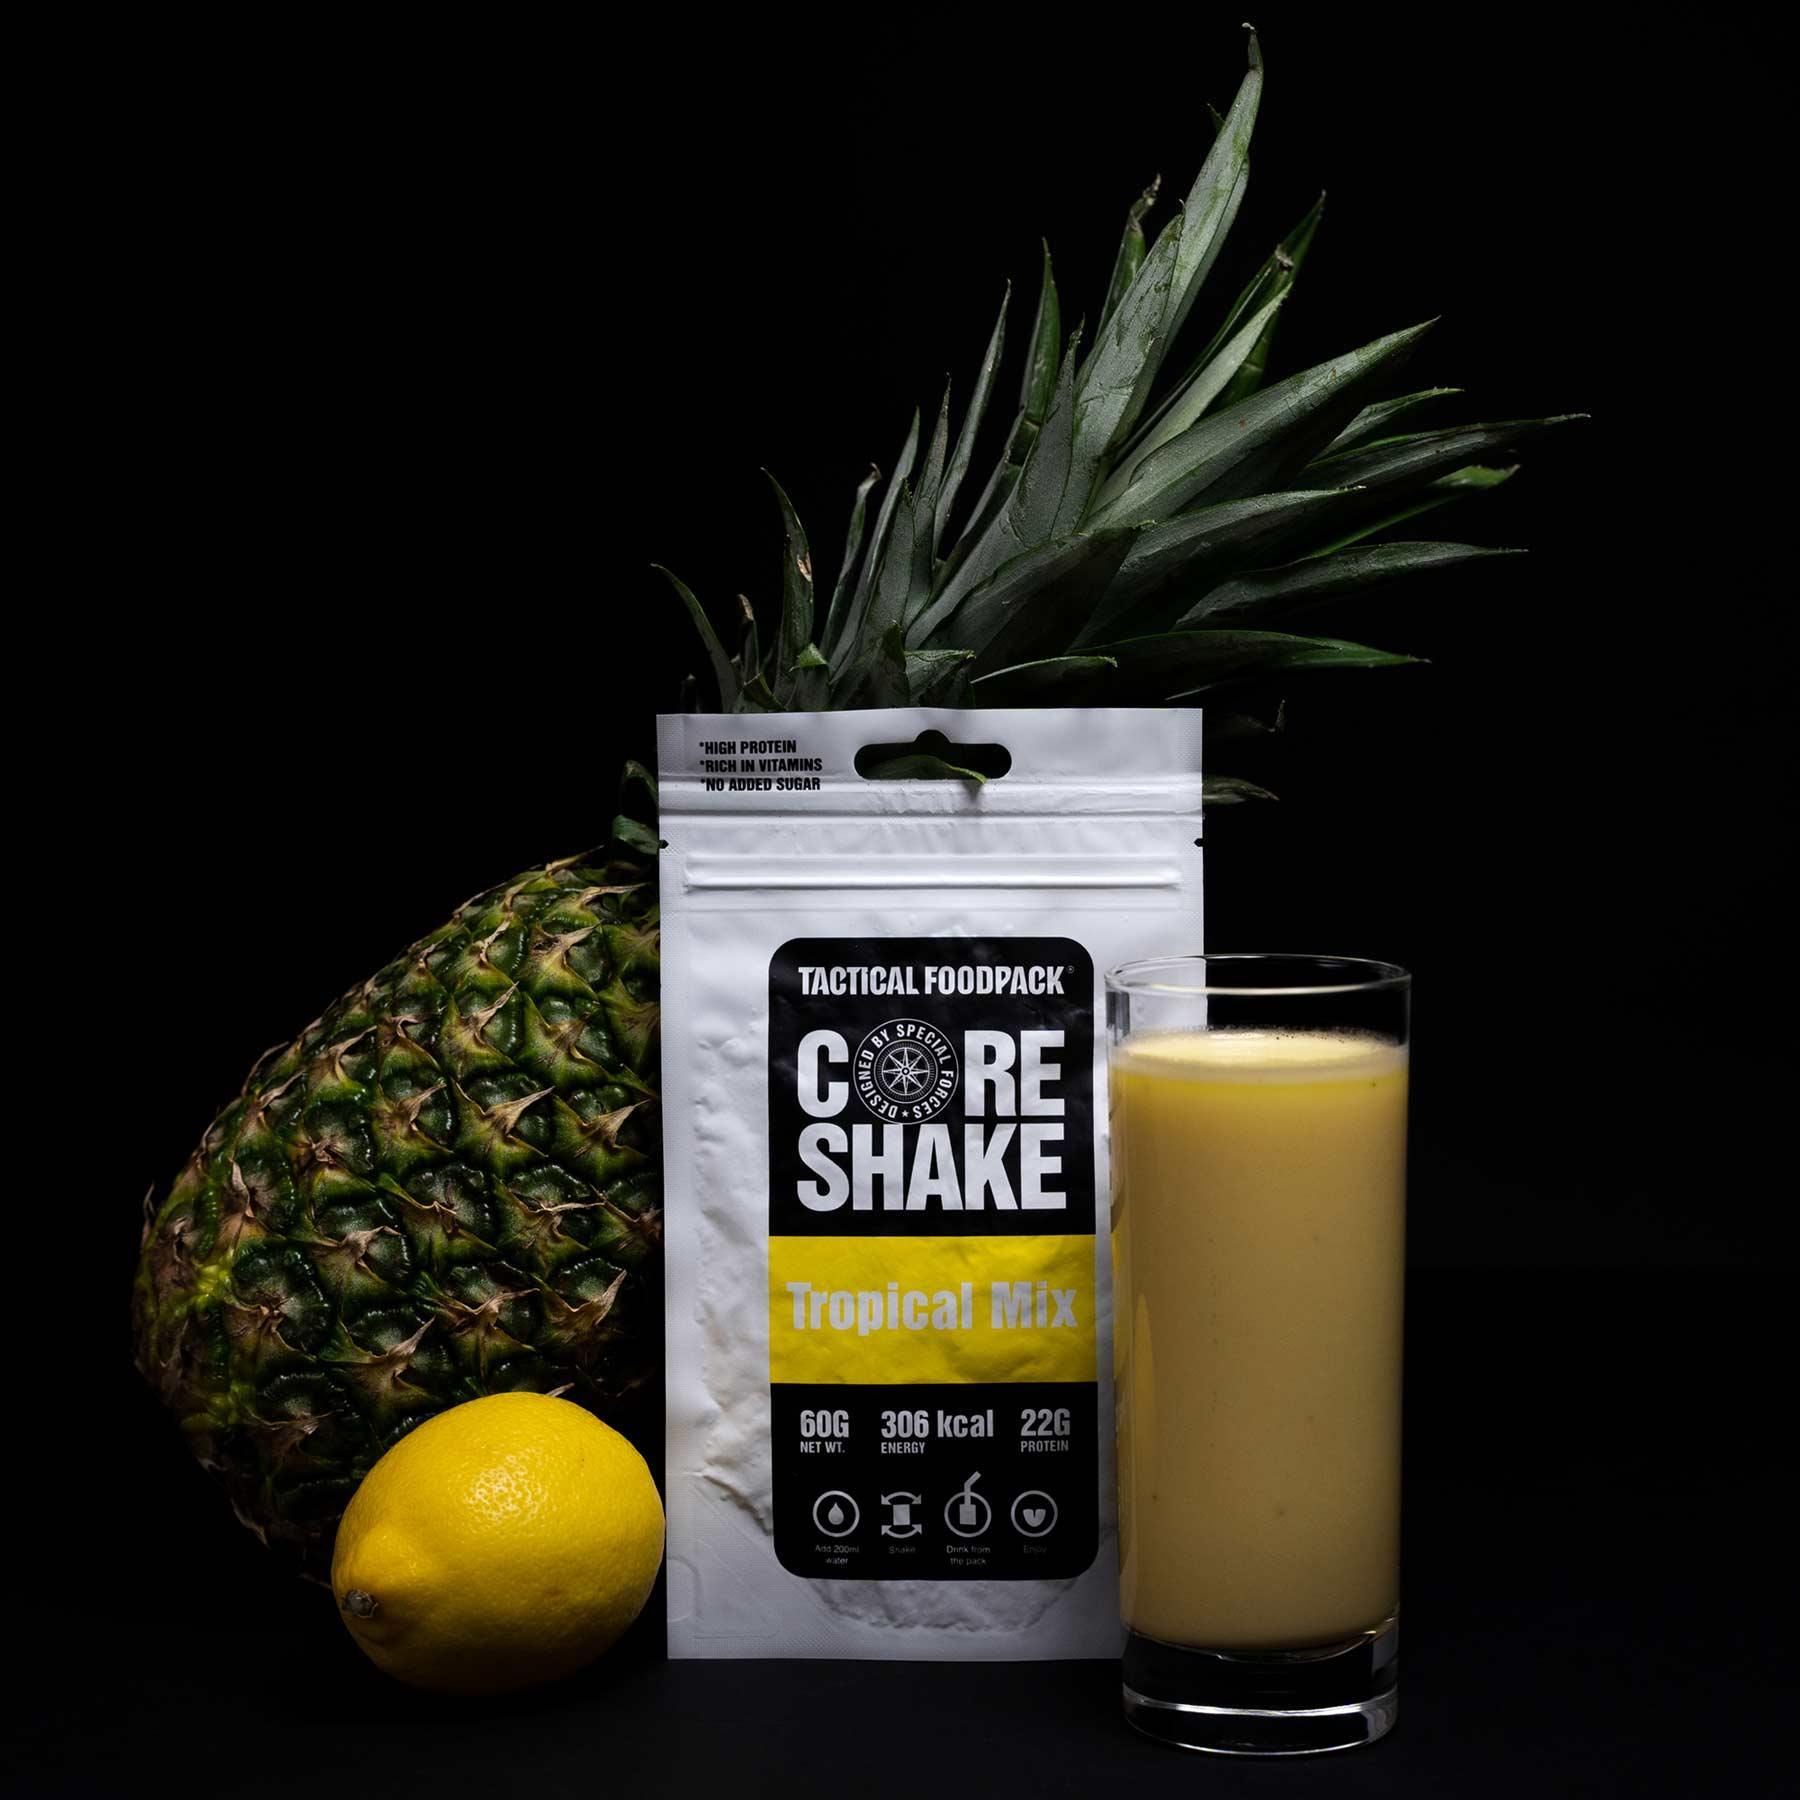 Tactical Foodpack Outdoornahrung | Core Shake Tropical Mix